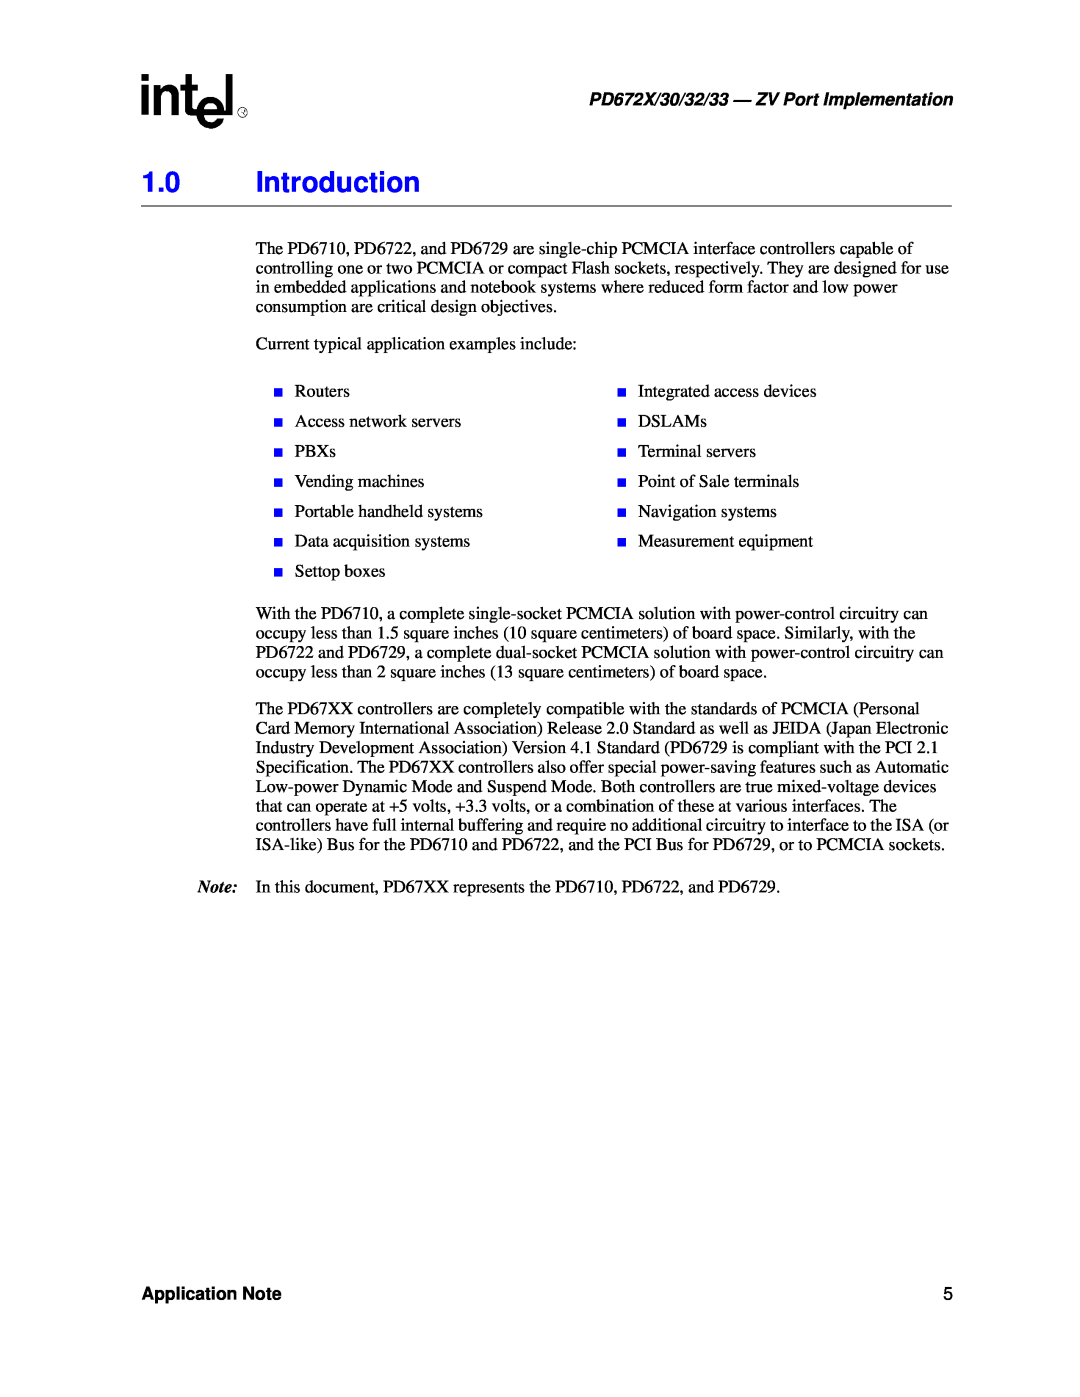 Intel manual 1.0Introduction, PD672X/30/32/33 - ZV Port Implementation, Application Note 